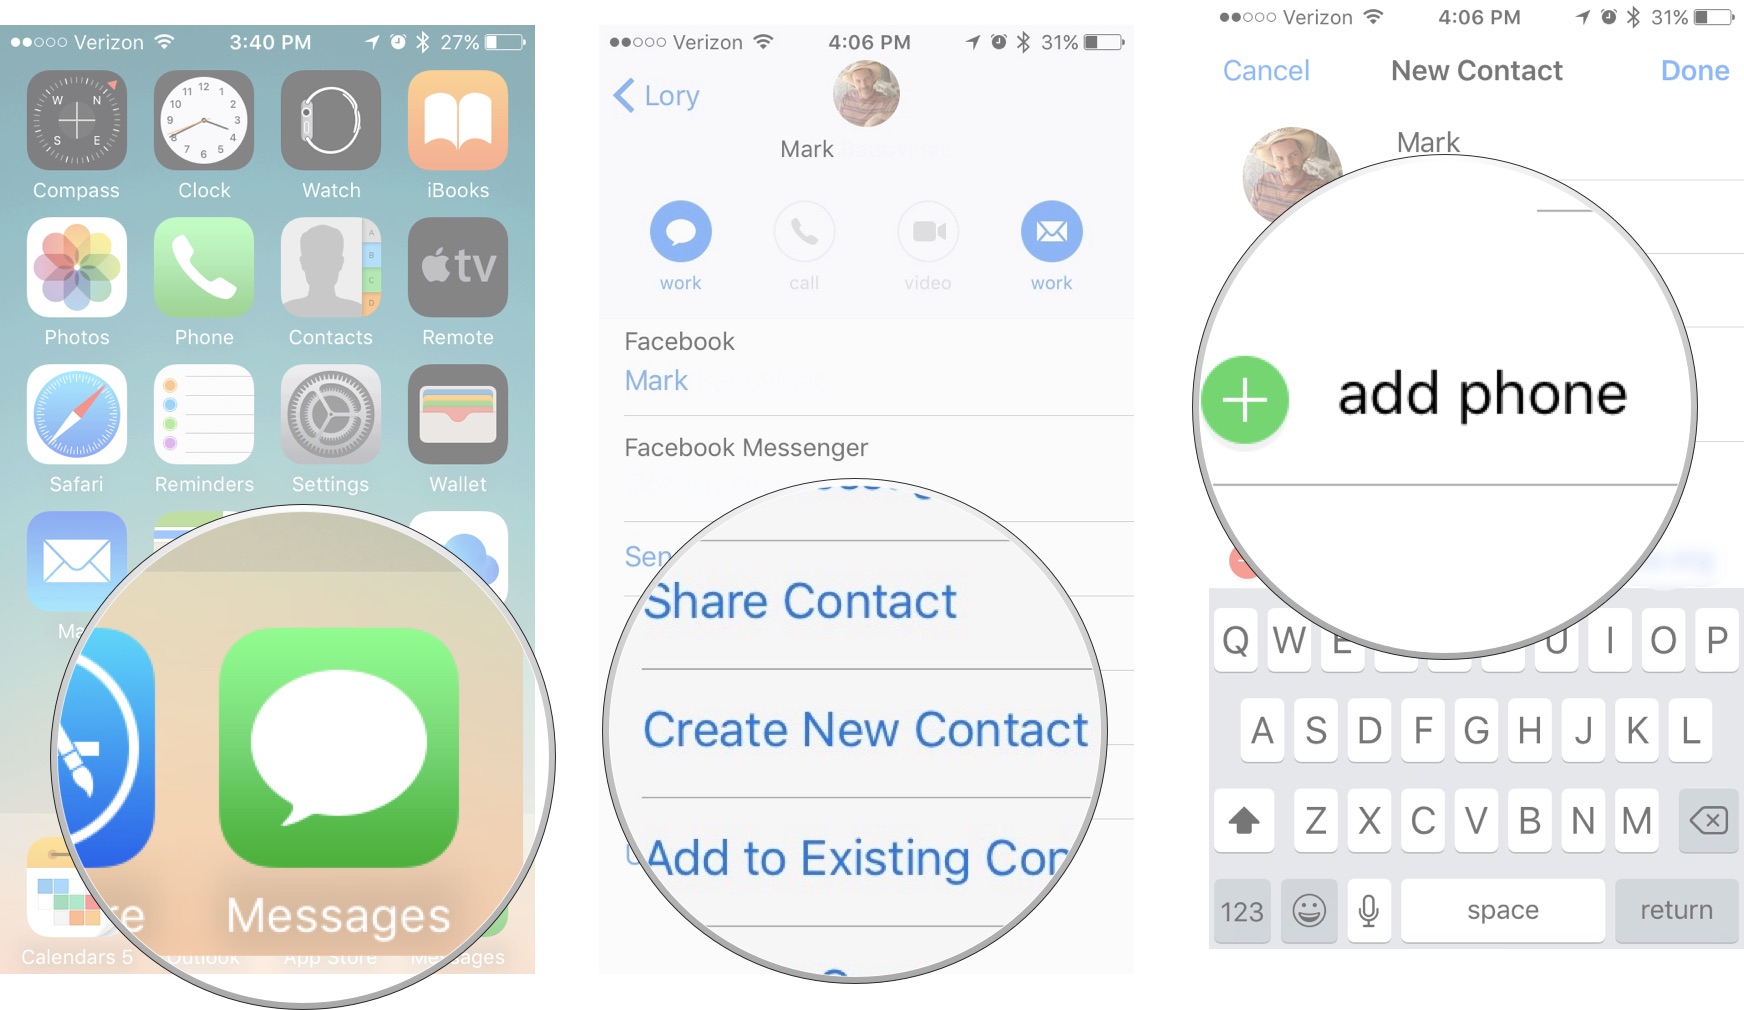 Open Messages app, then tap the contact card, then tap Create new Contact, then add new info